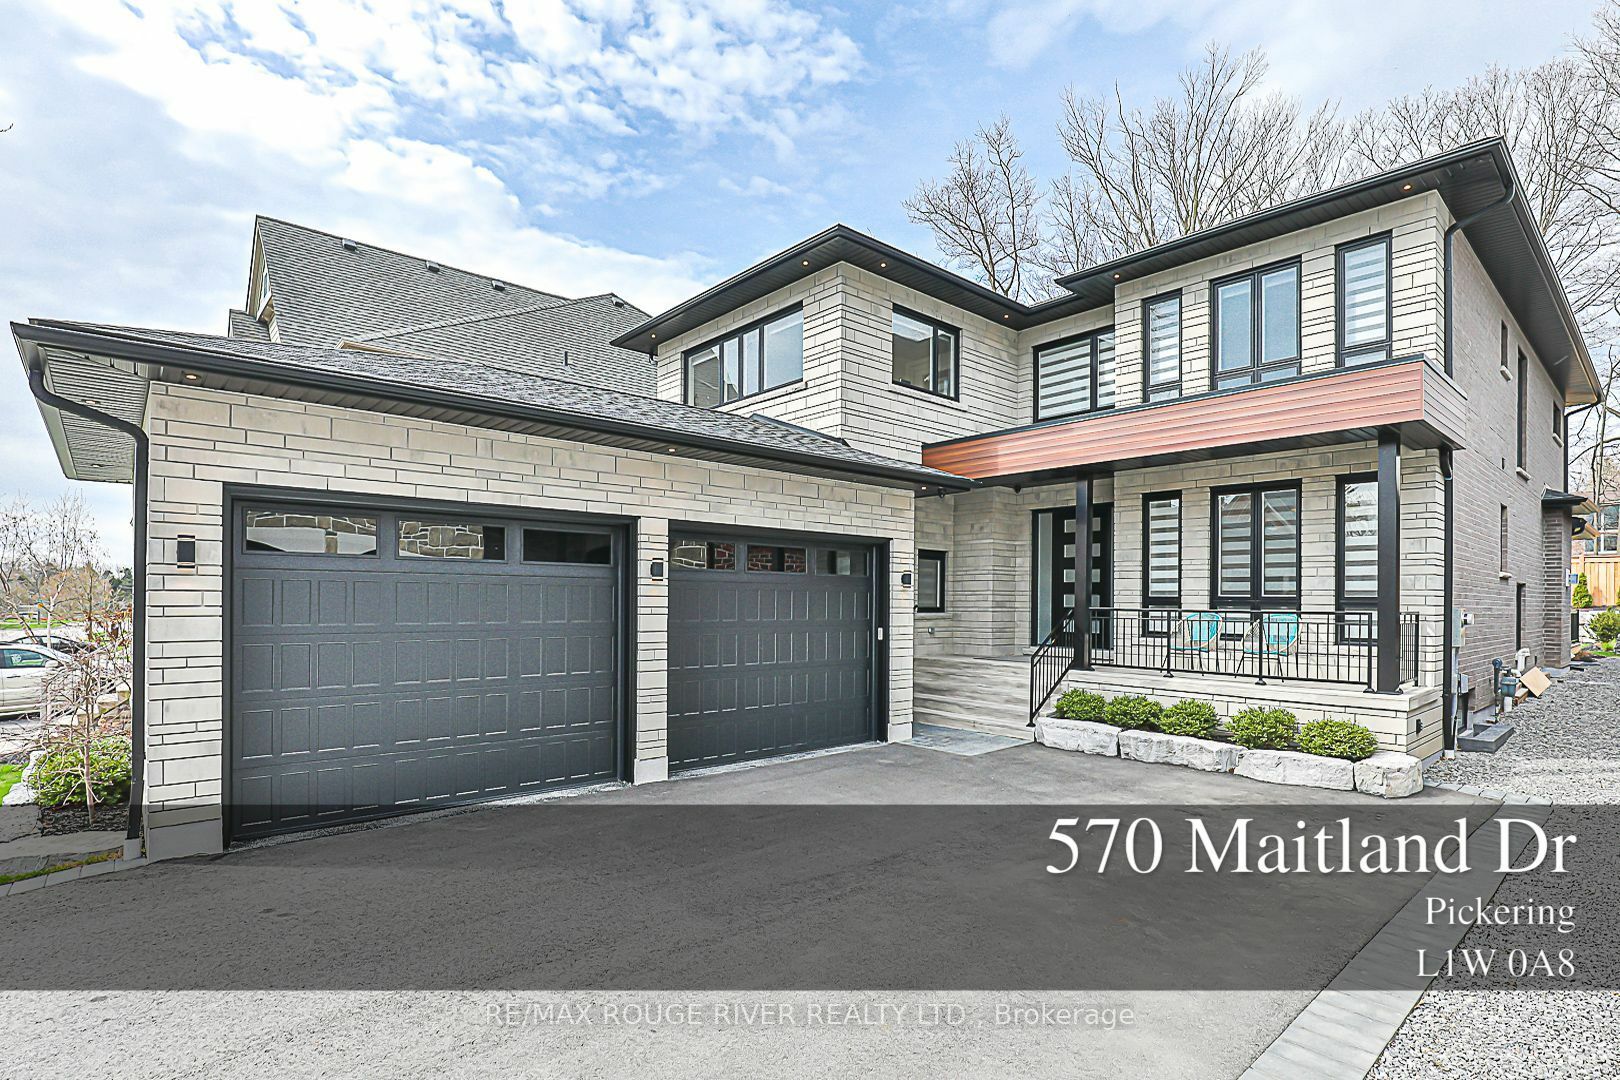 570 Maitland Dr  Pickering ON L1W 0A8 photo